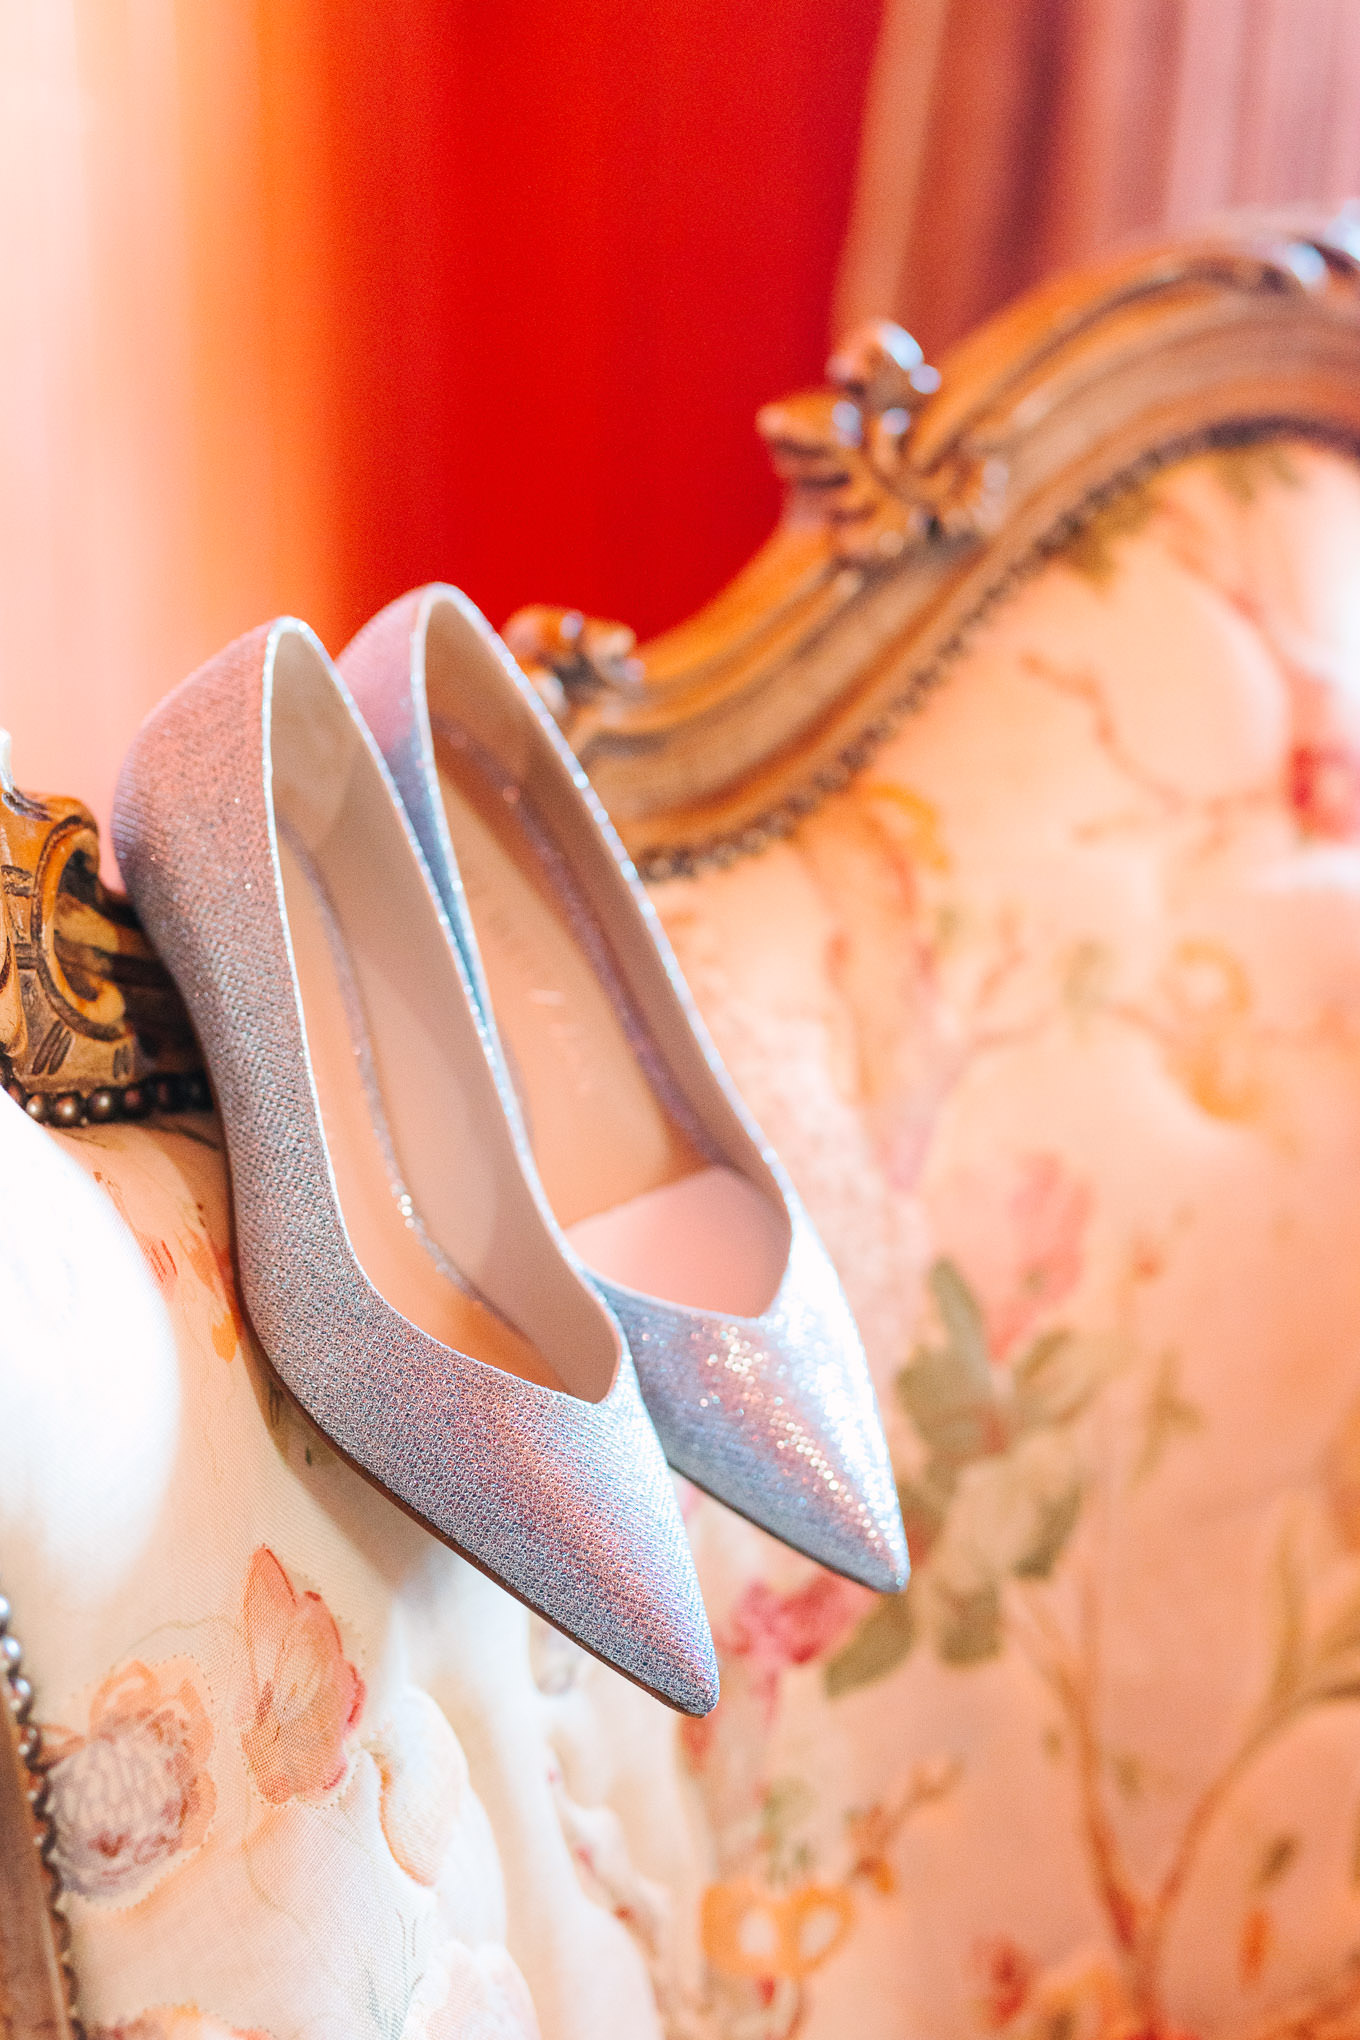 Silver sparkly bridal shoes | Colorful and quirky wedding at Higuera Ranch in San Luis Obispo | #sanluisobispowedding #californiawedding #higueraranch #madonnainn   Source: Mary Costa Photography | Los Angeles